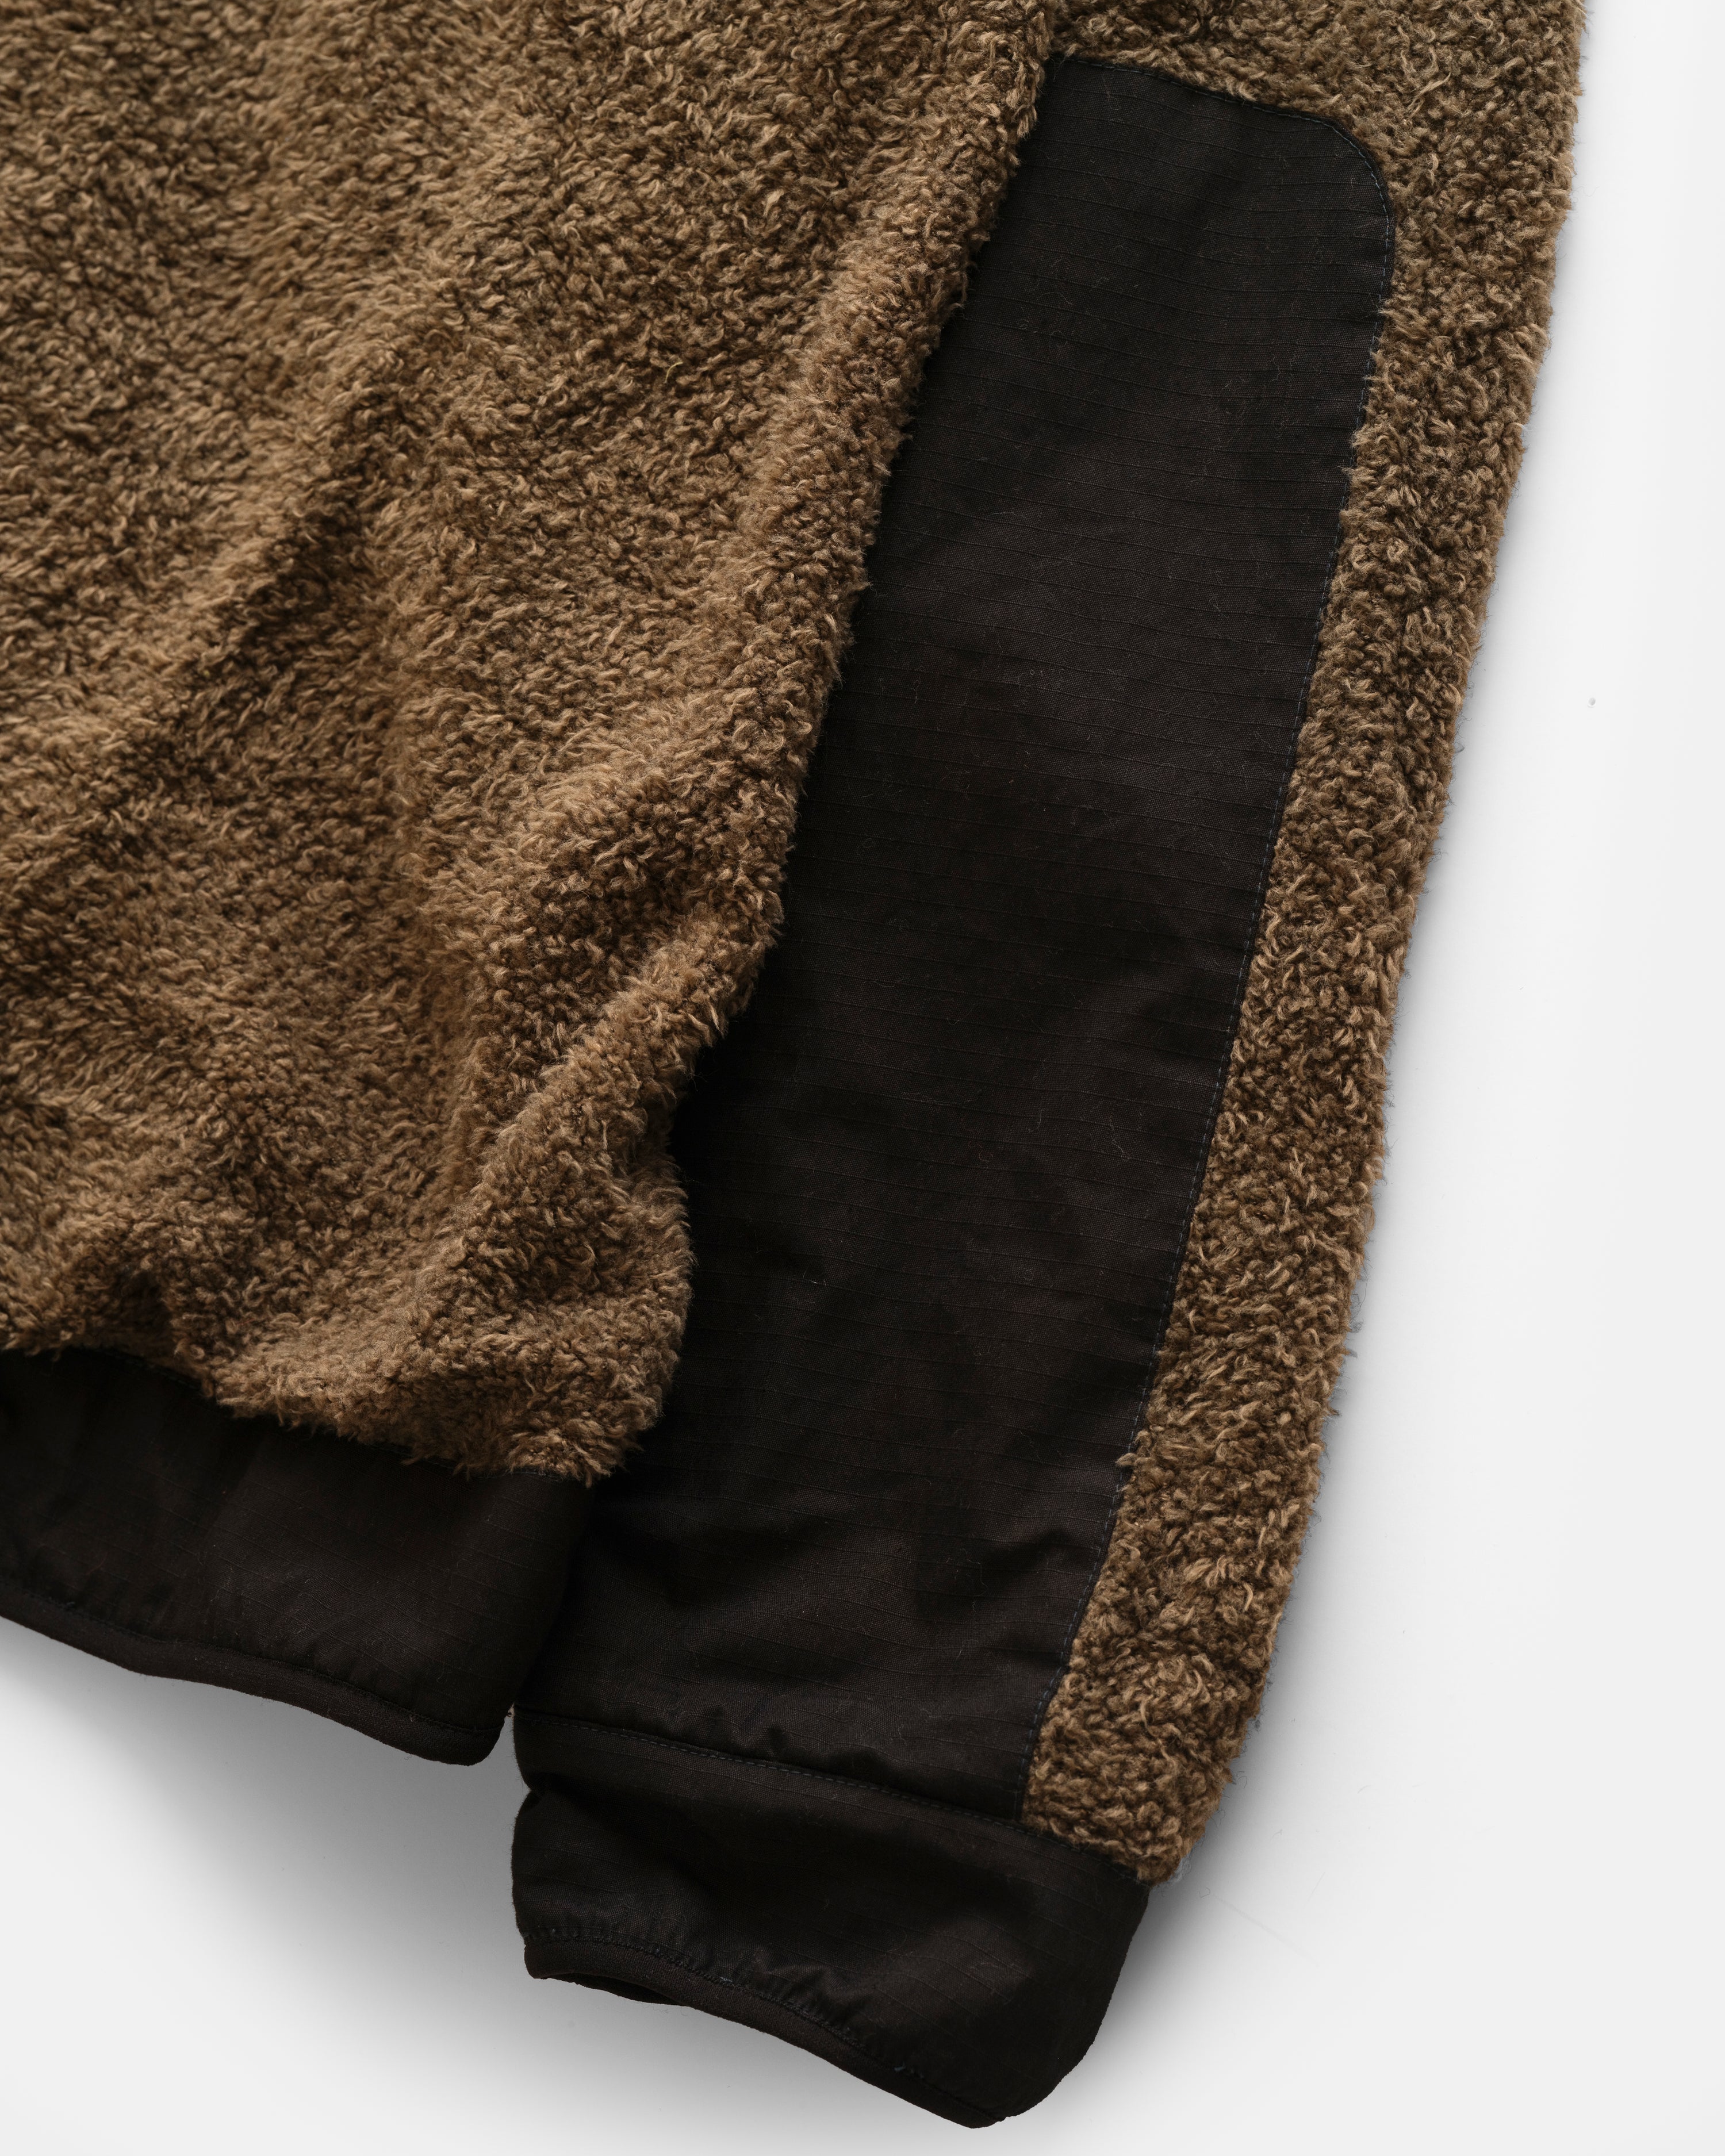 TEMPO LTE HOODED FLEECE - BROWN BLENDED WOOL BOUCLE / BLACK 60/40 RIPSTOP